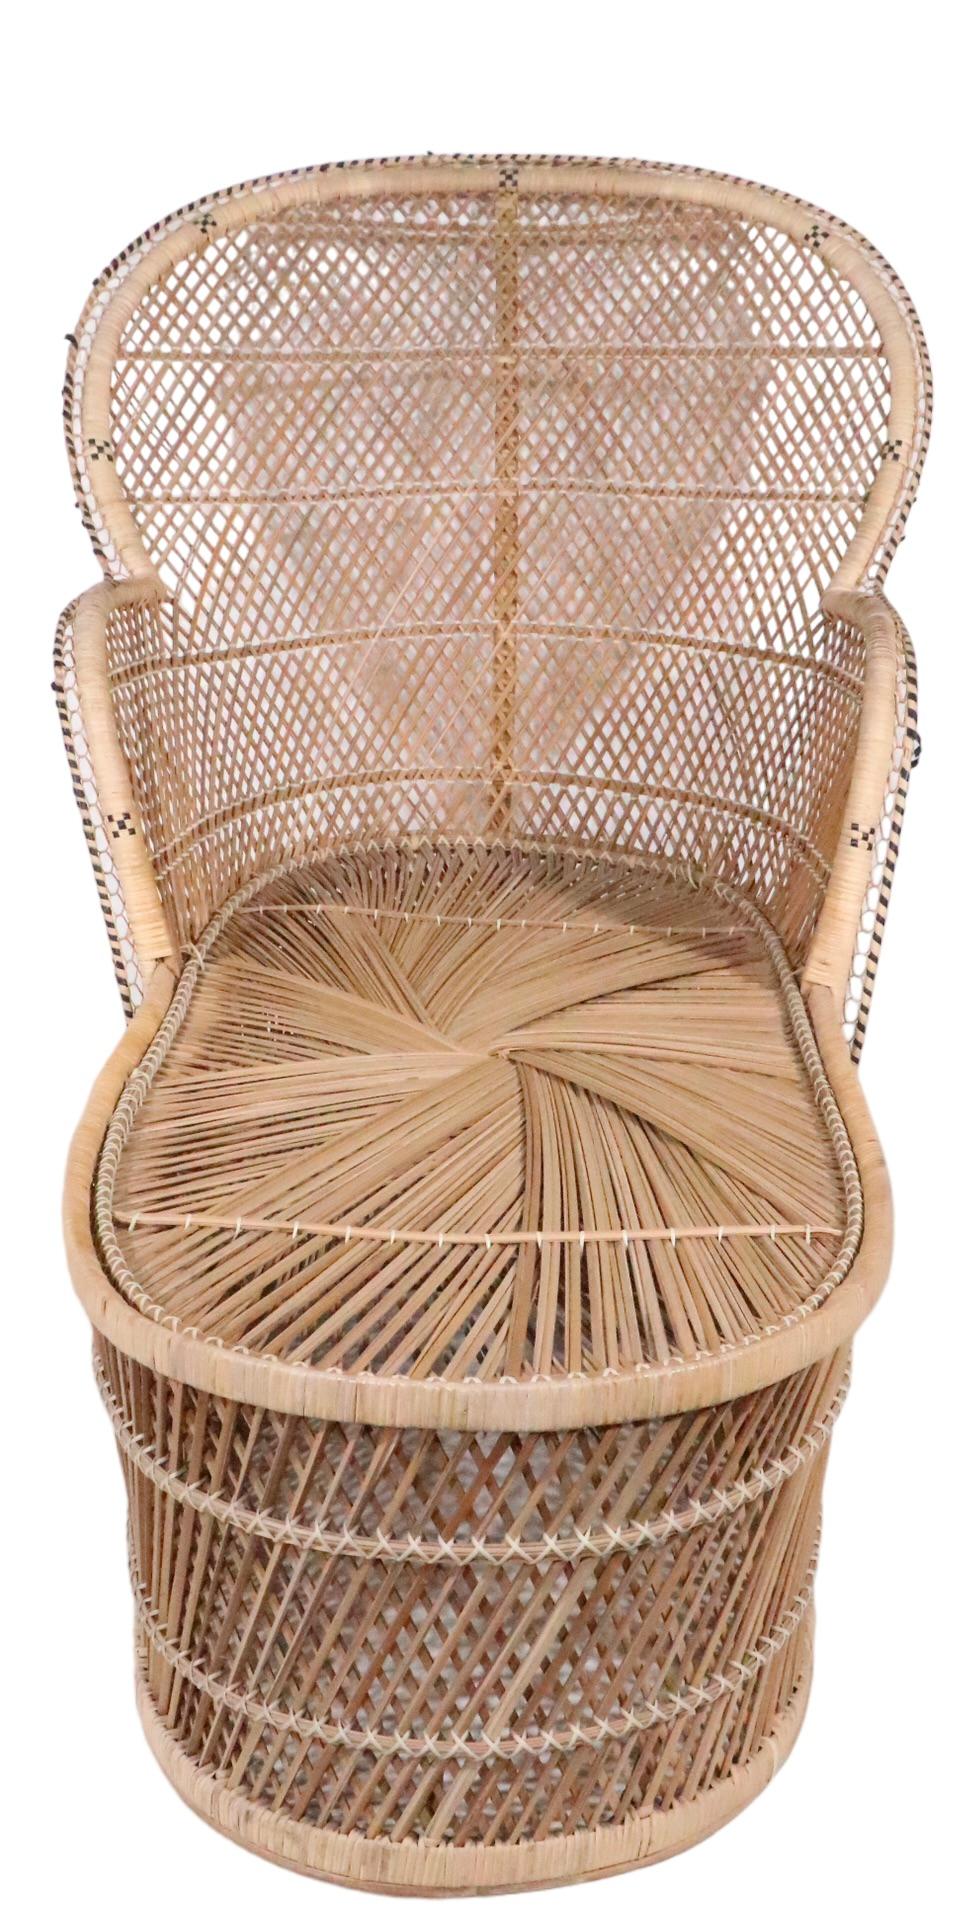 Woven Wicker Peacock Style Chaise Lounge c 1970's For Sale 1